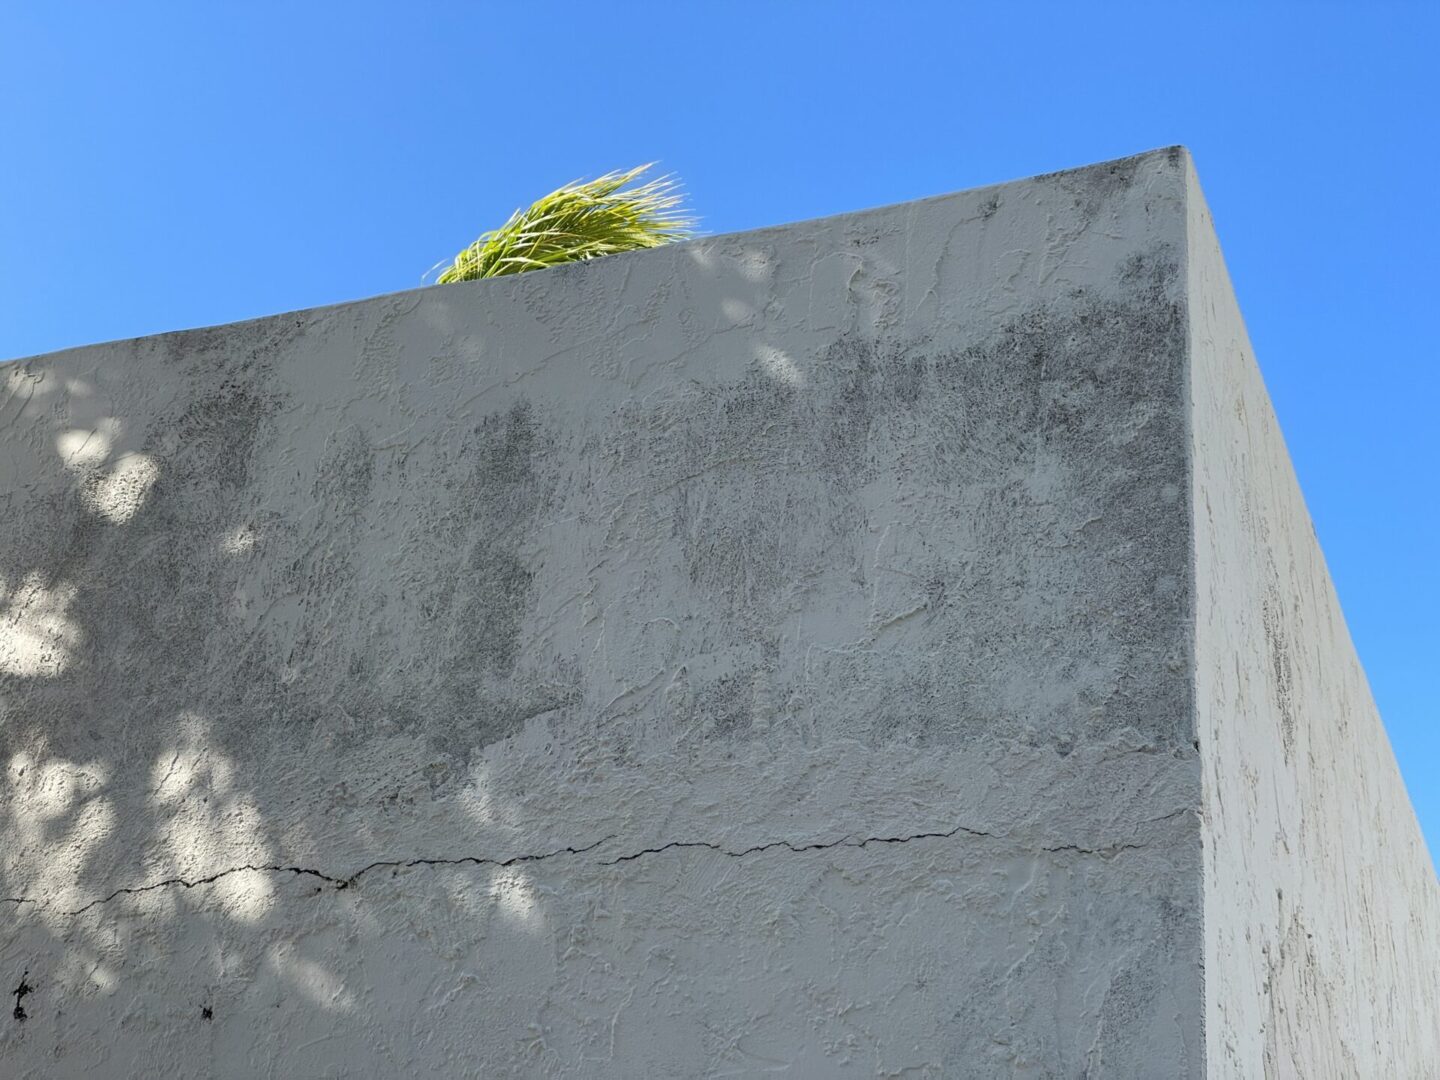 A concrete wall with some green plants growing on it